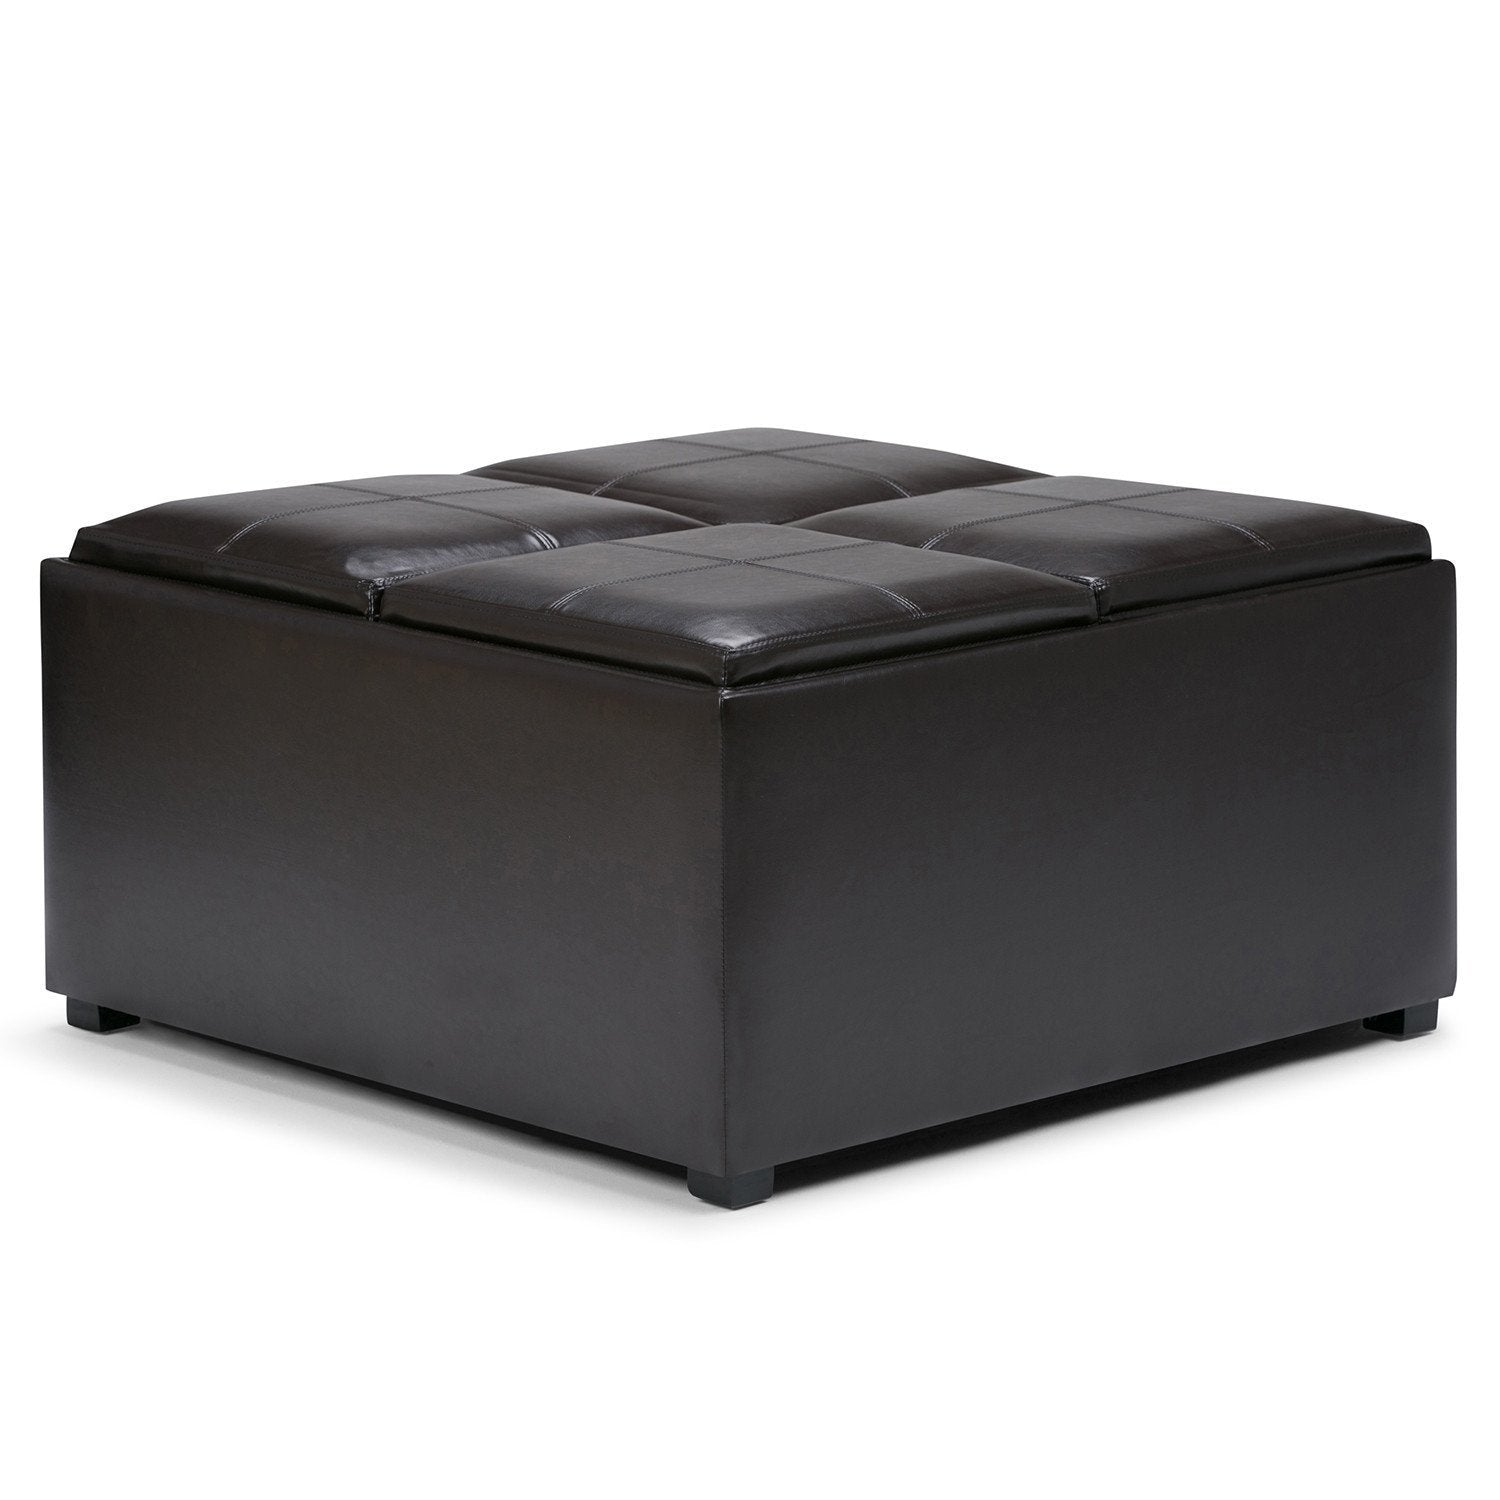 Tanners Brown Vegan Leather | Avalon Vegan Leather Square Coffee Table Storage Ottoman